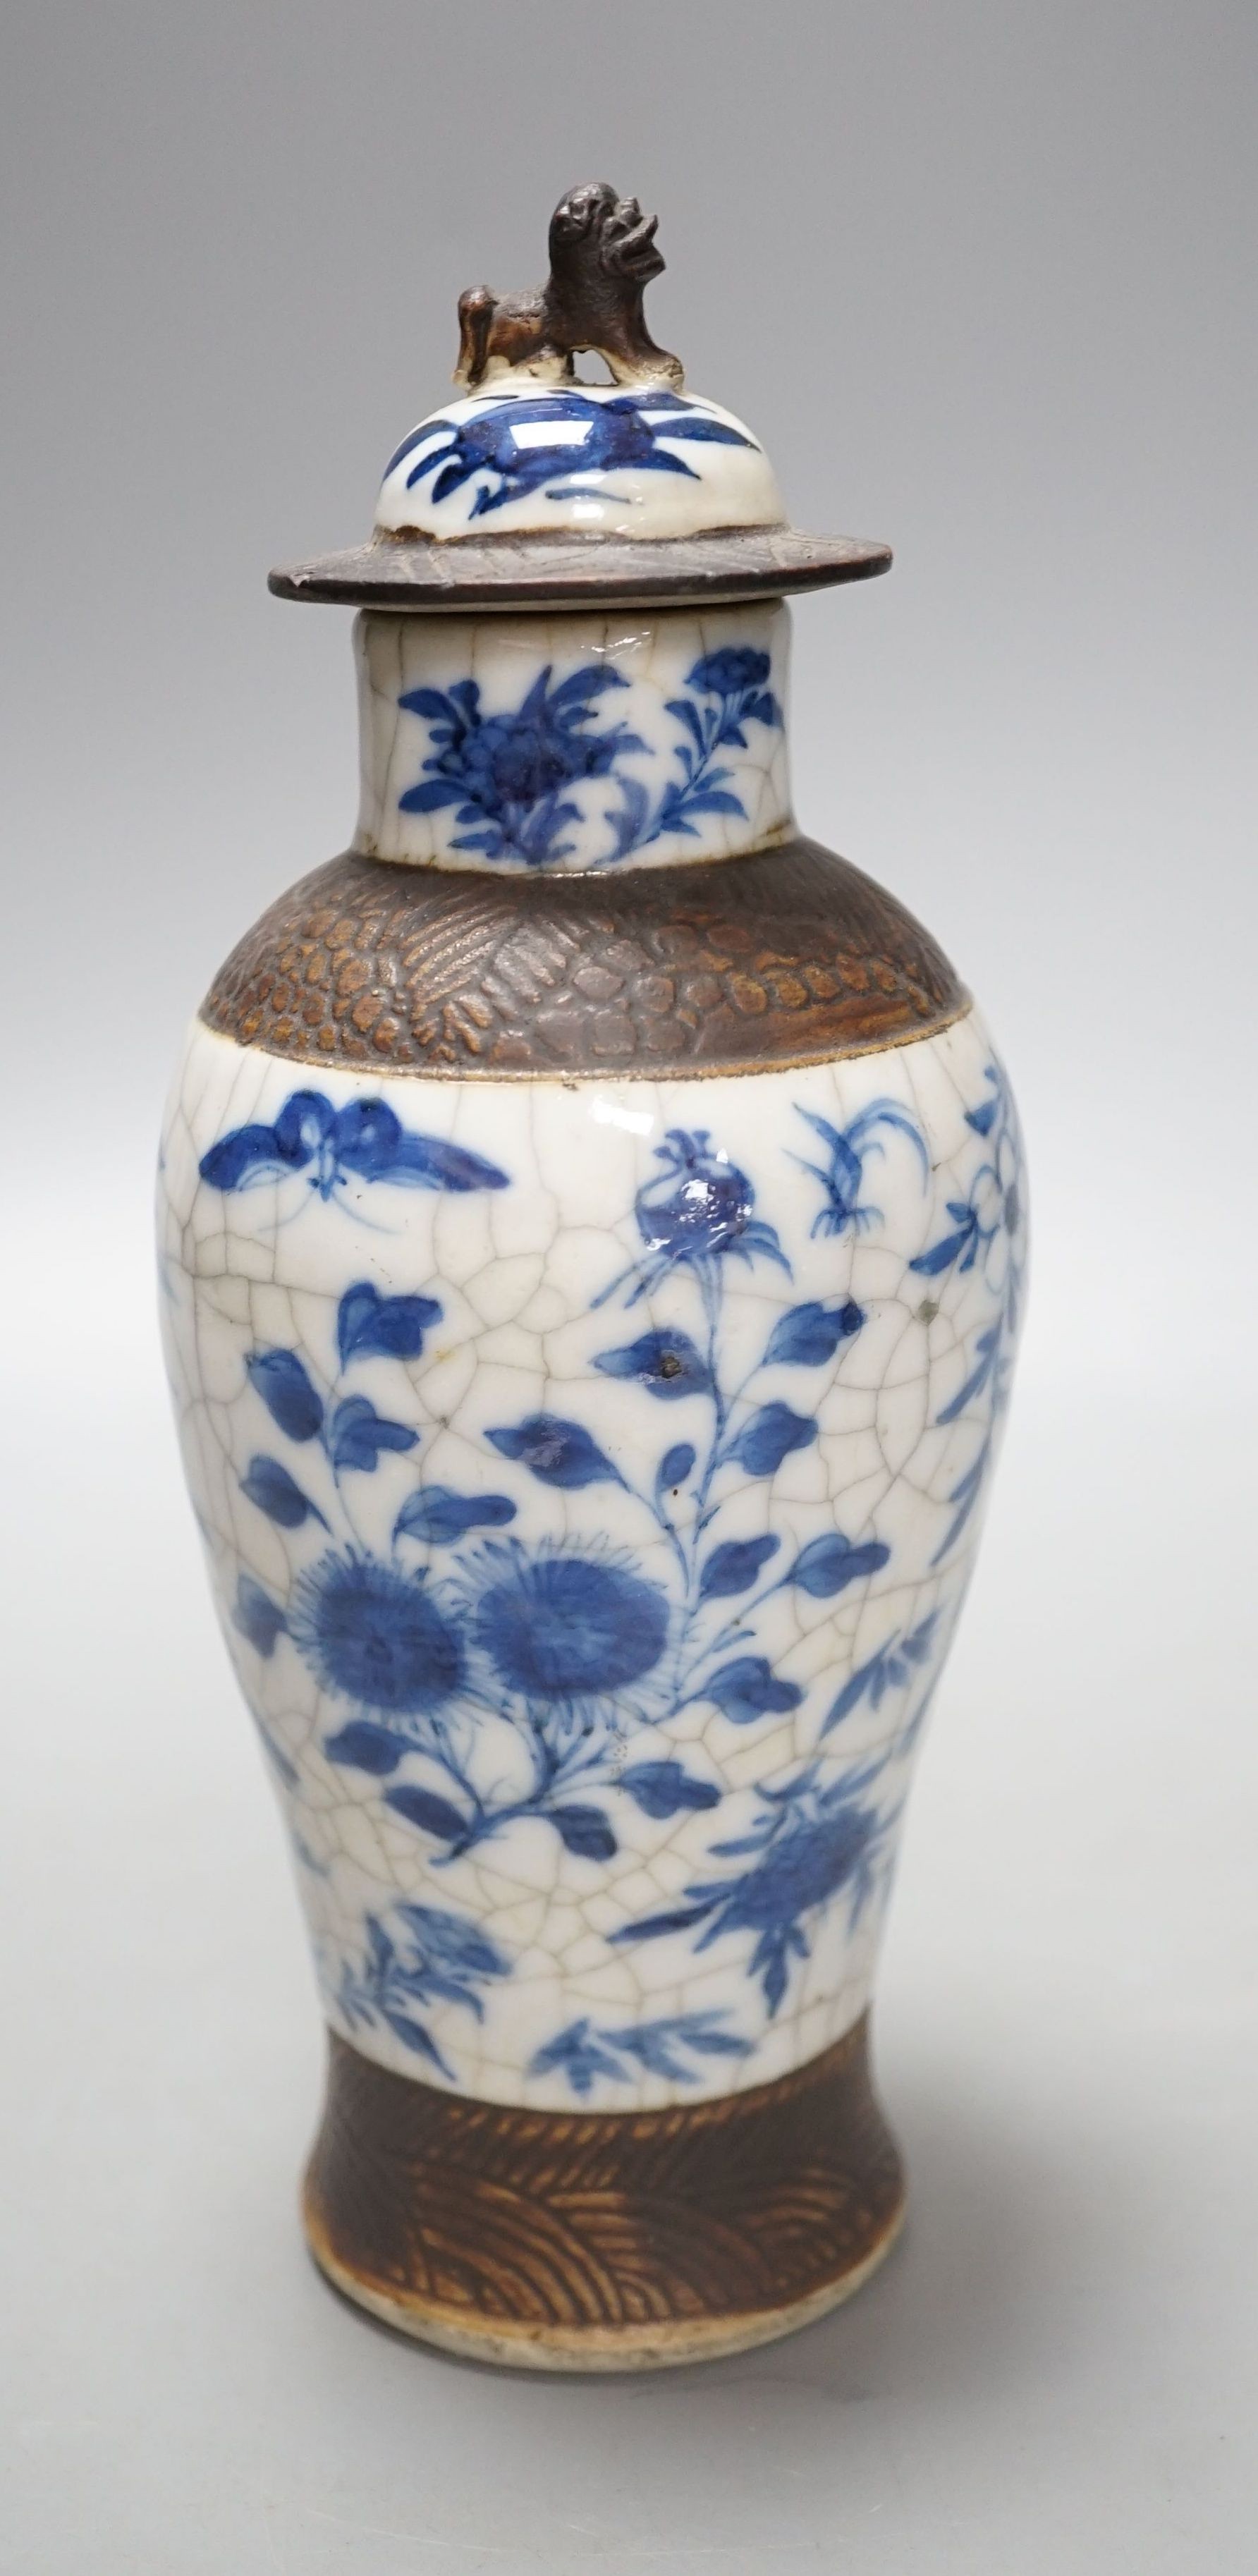 A Chinese blue and white crackle ware vase, c.1900, 22cms high including cover.